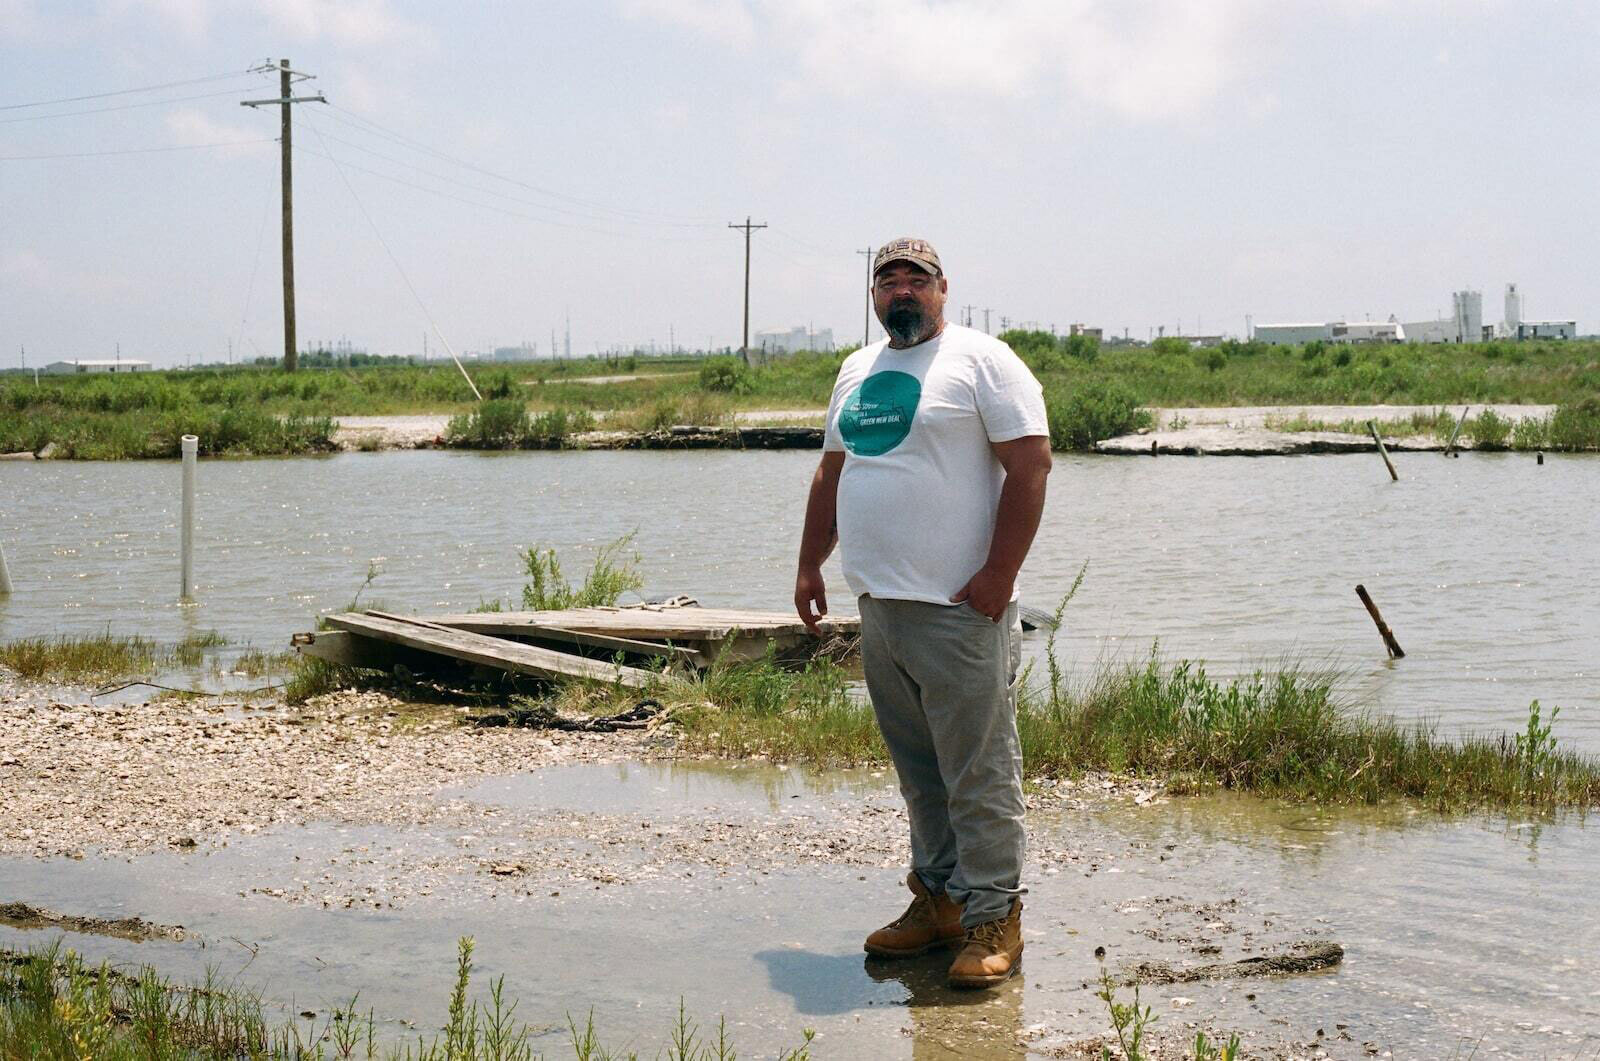 A man in a baseball cap and t-shirt in front of a river